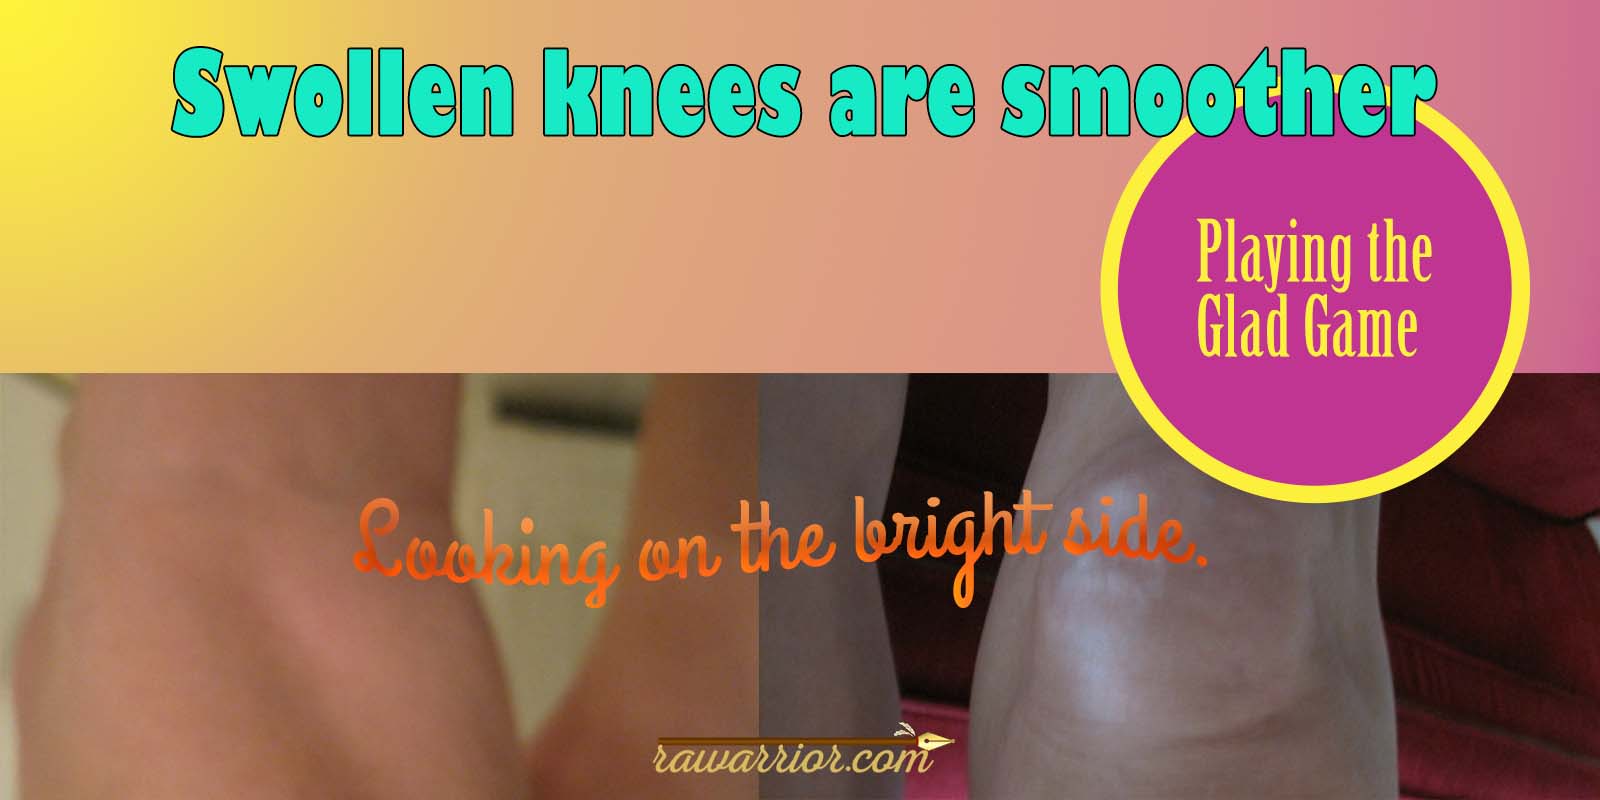 swollen knees are smoother